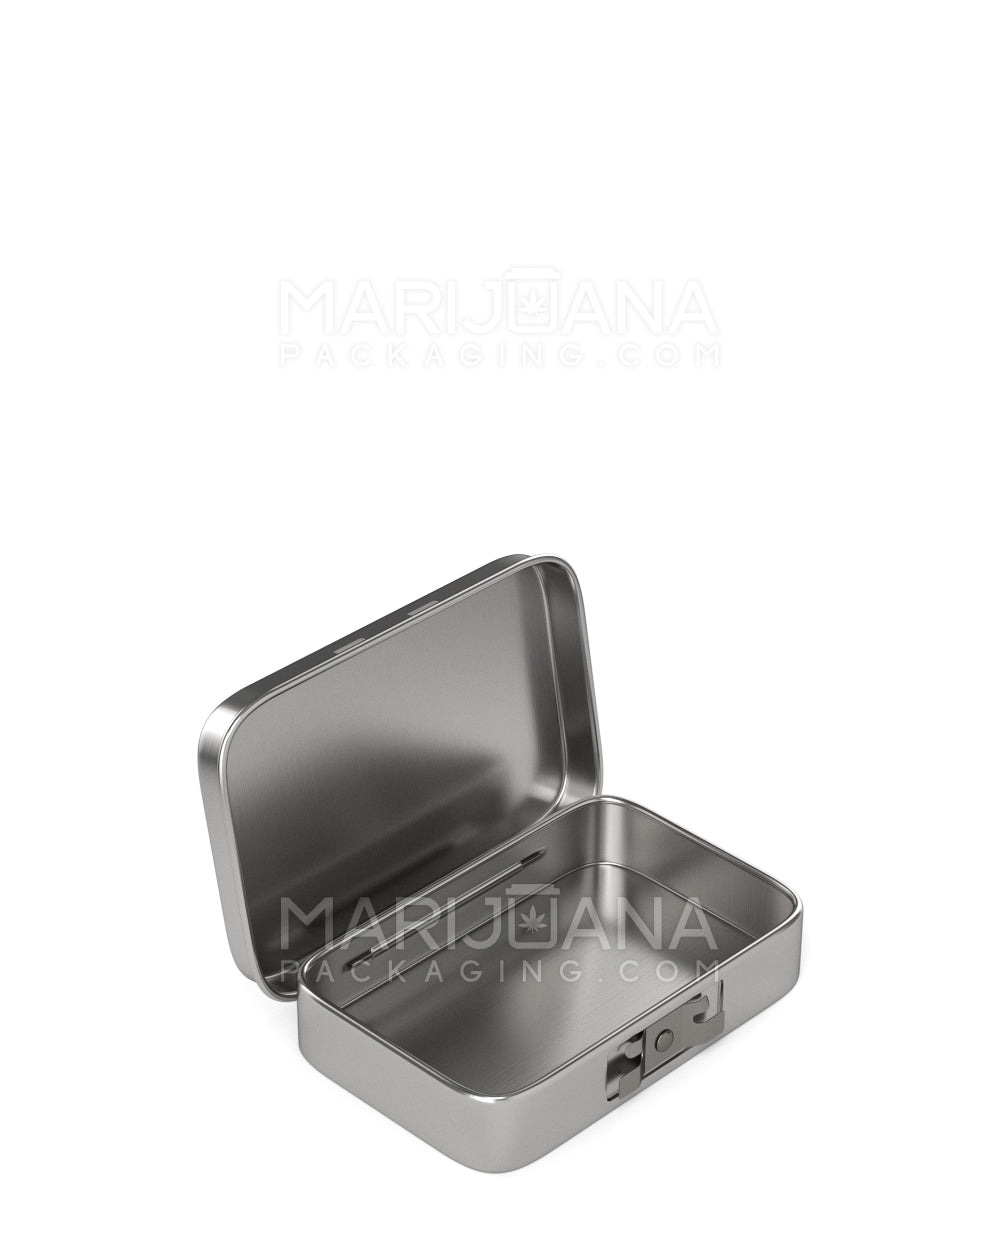 Child Resistant | 100% Recyclable Safely Lock Ultra Edible & Joint Box | 79mm x 53.5mm - Silver Tin - 1